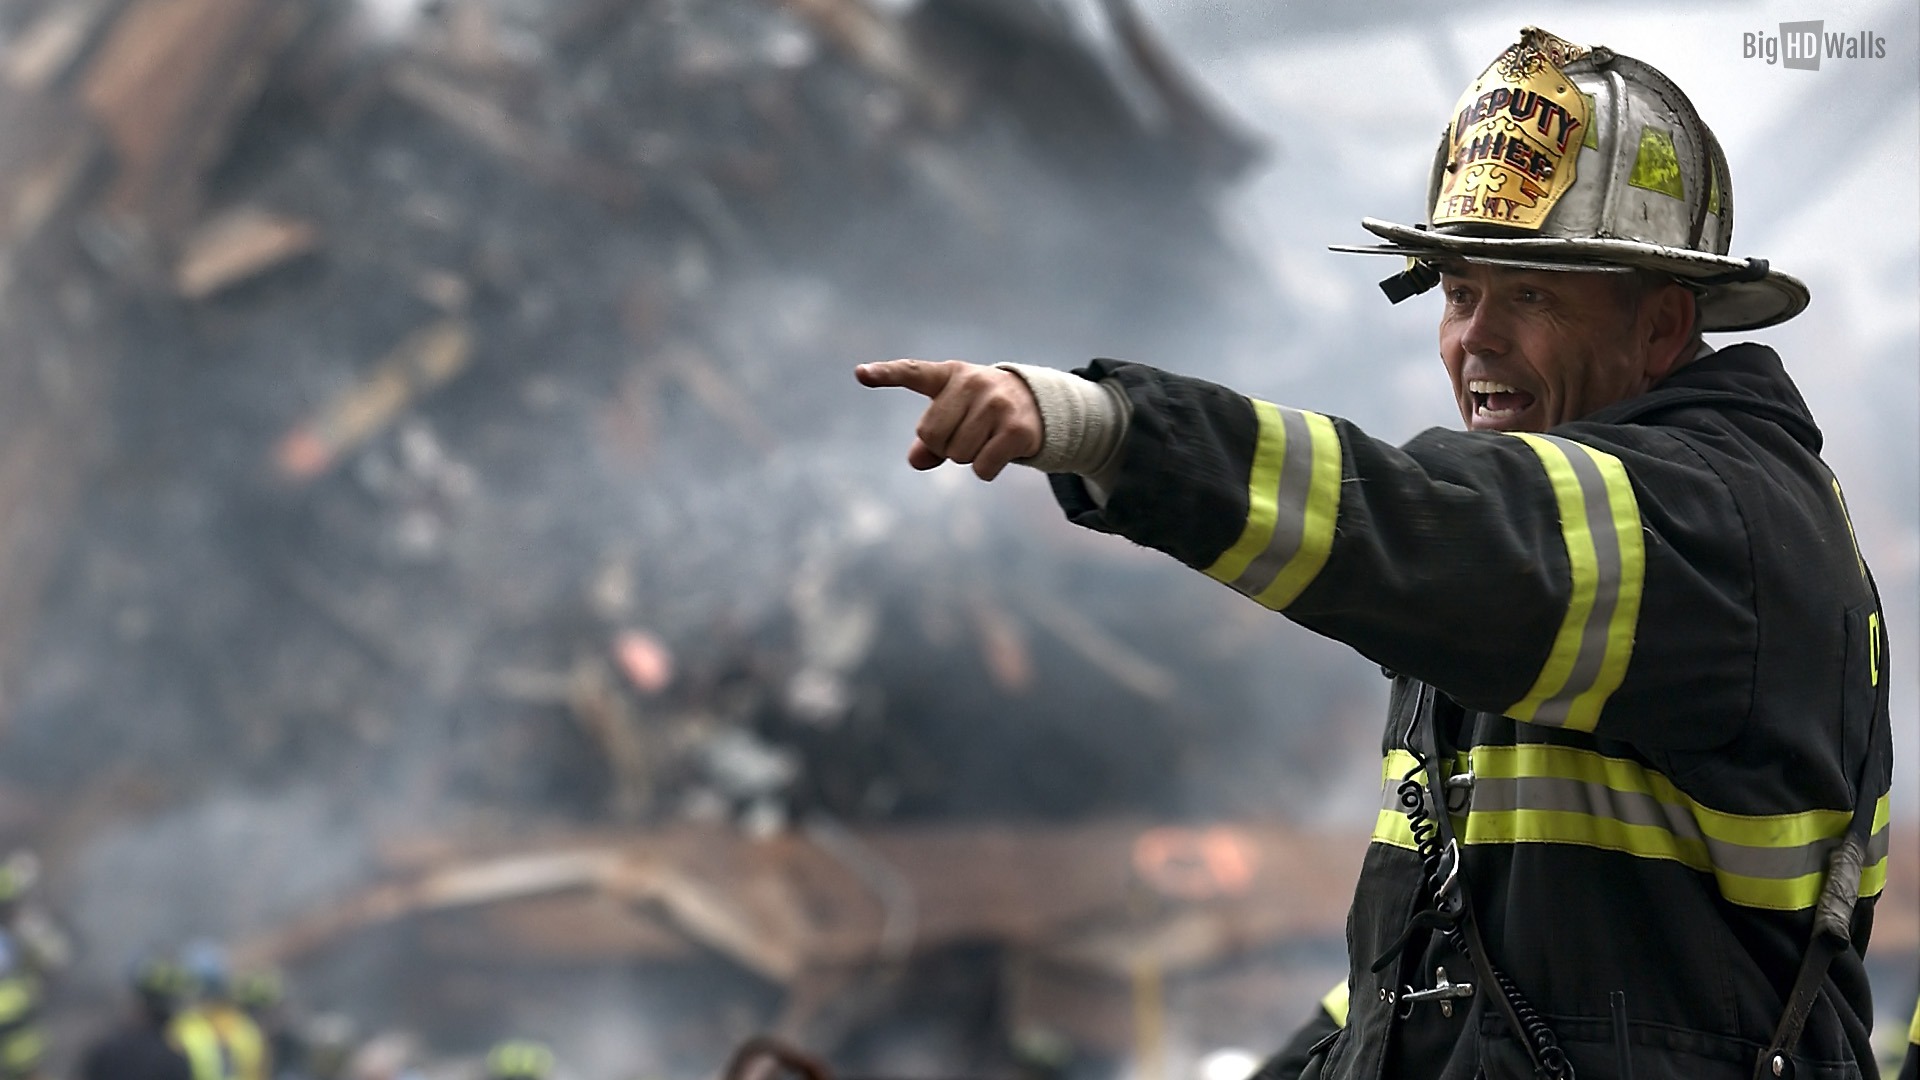 Hd Wallpapers Of New York City Bighdwal - Firefighter In Action 9 11 - HD Wallpaper 